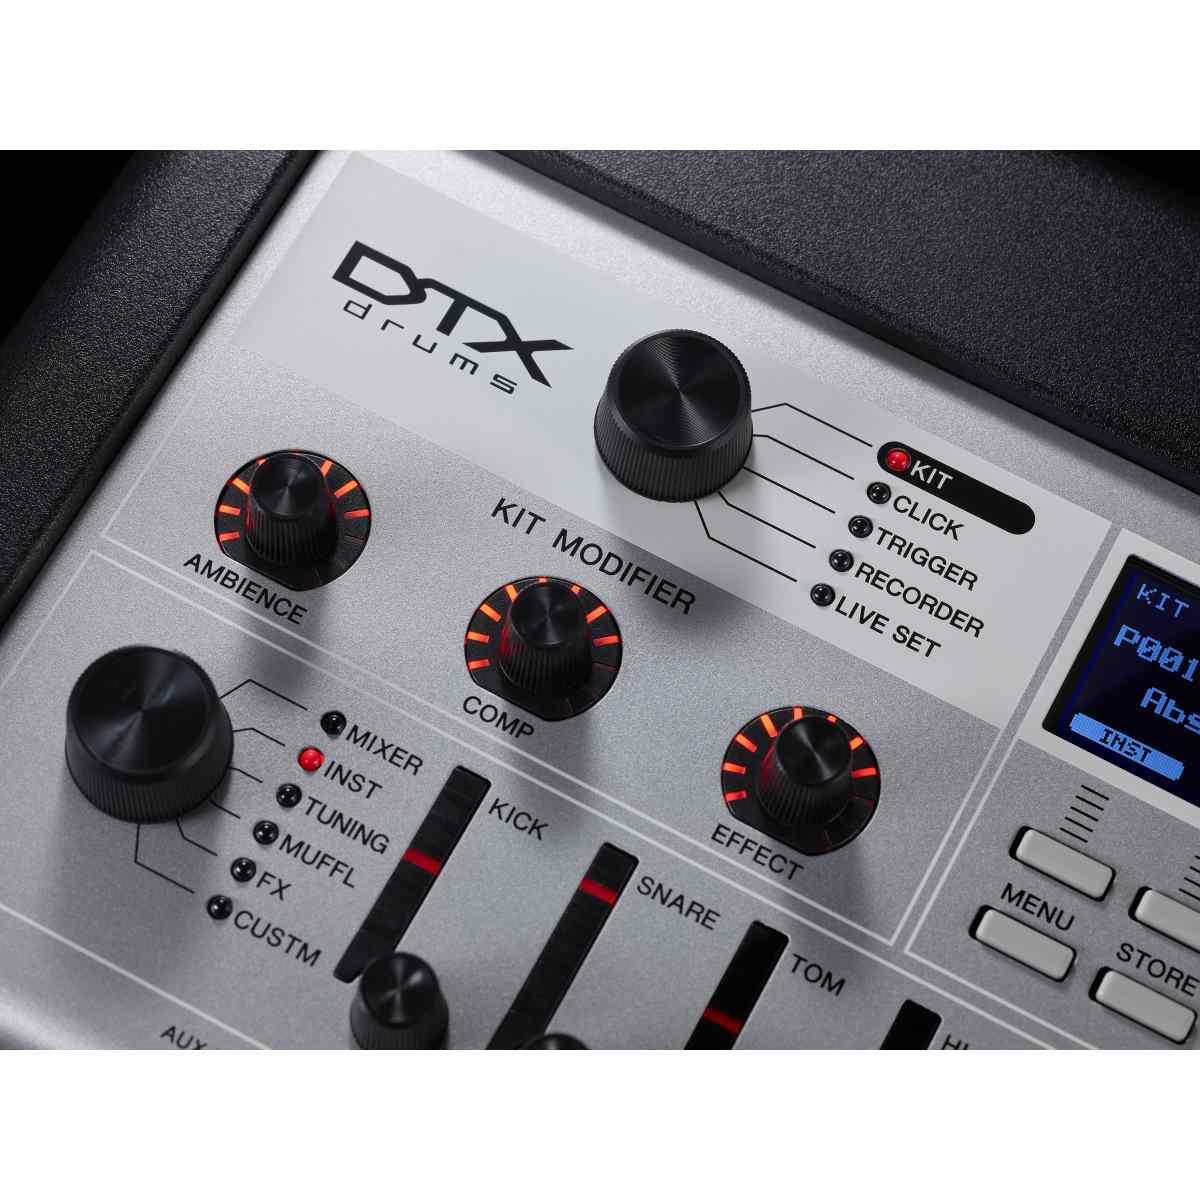 Yamaha dtx10k-xbf batteria elettronica pad silicone - black forest